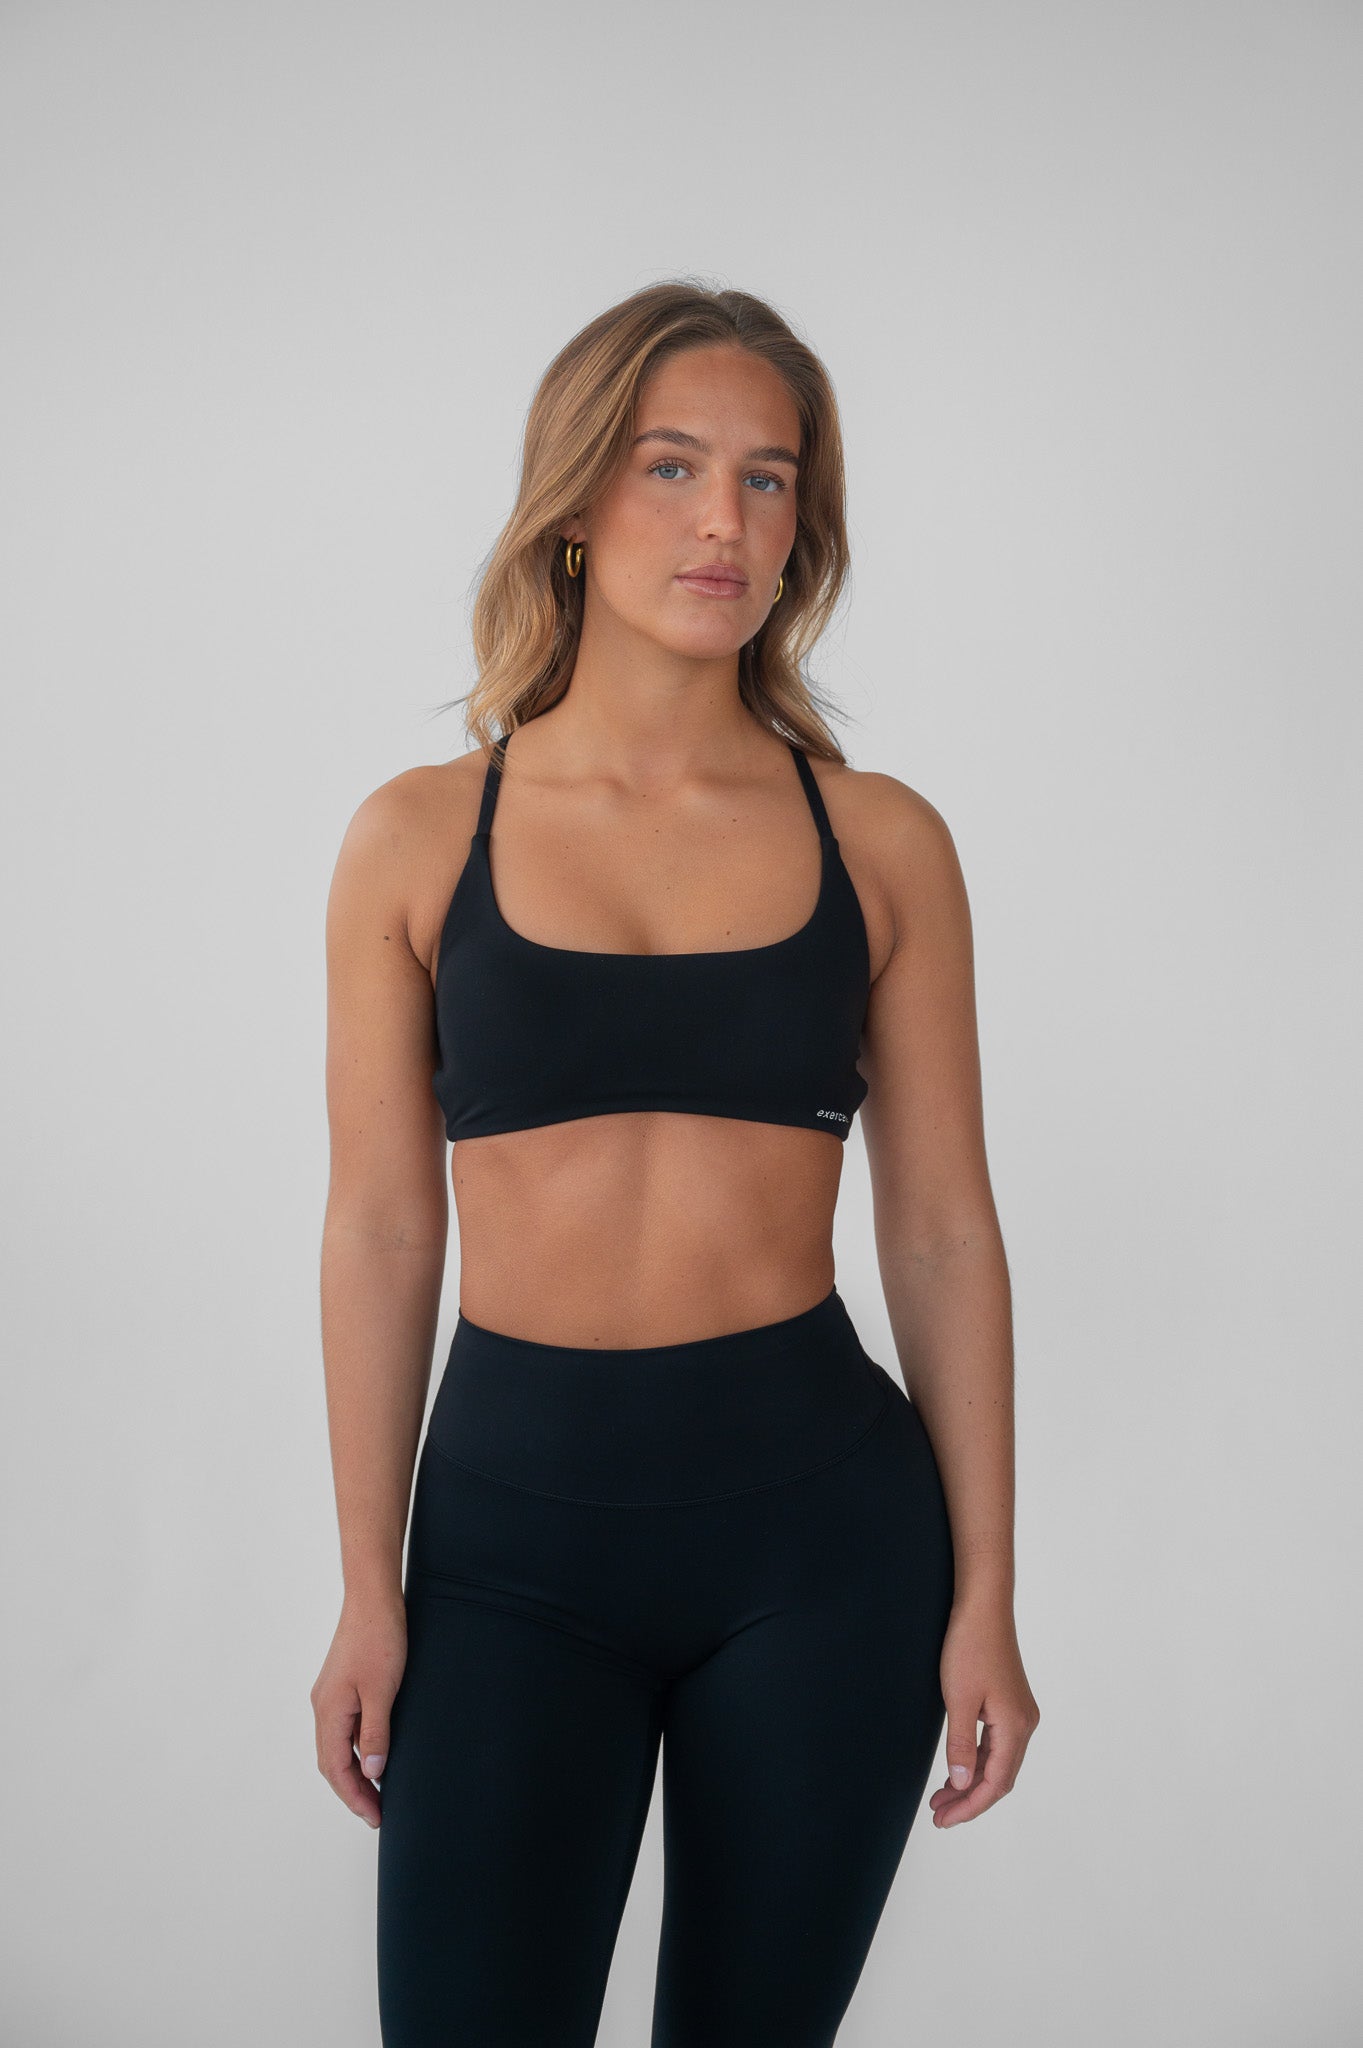 Lounge Auden Comfort Bra XXL Black Bralette Sport Work Out Women Plus Yoga  Gym - $15 New With Tags - From Alexis